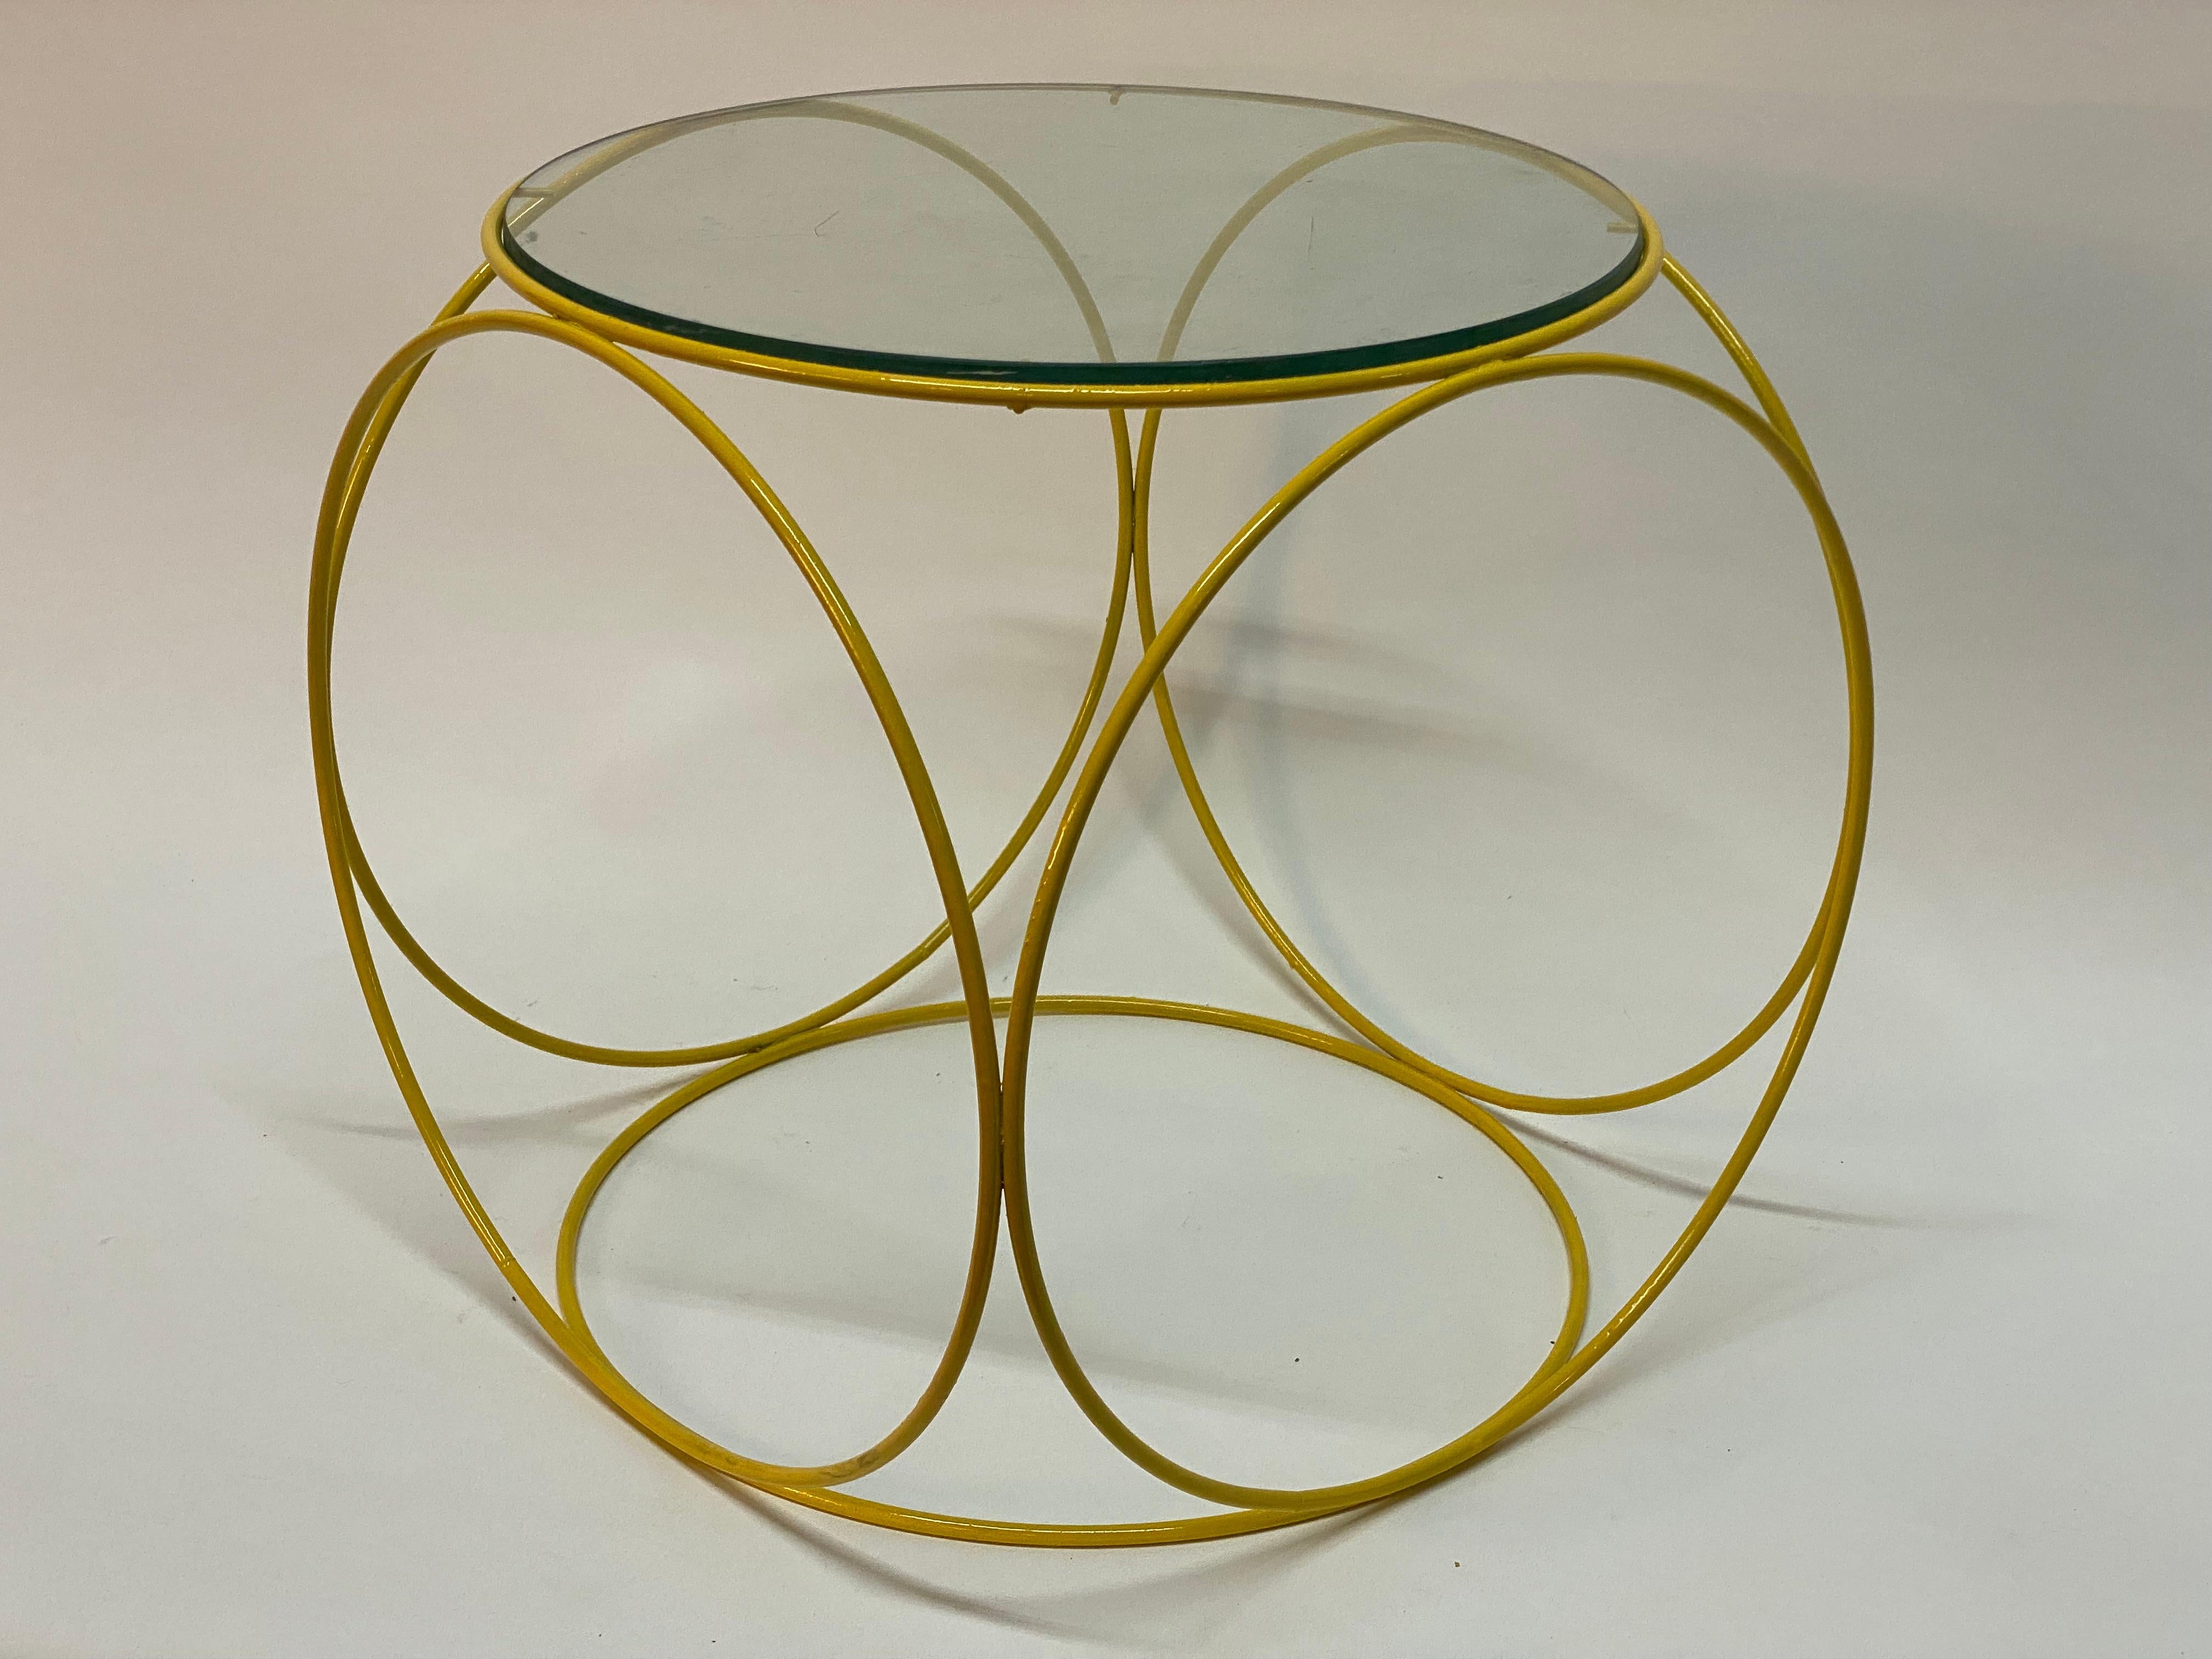 Six sided glass ring table. Circa 1960-70. Solid steel rod construction with flanges to hold glass in place. A great accent side table where the negative space creates fantastic patterns from whichever angle of viewing. Round glass top with green